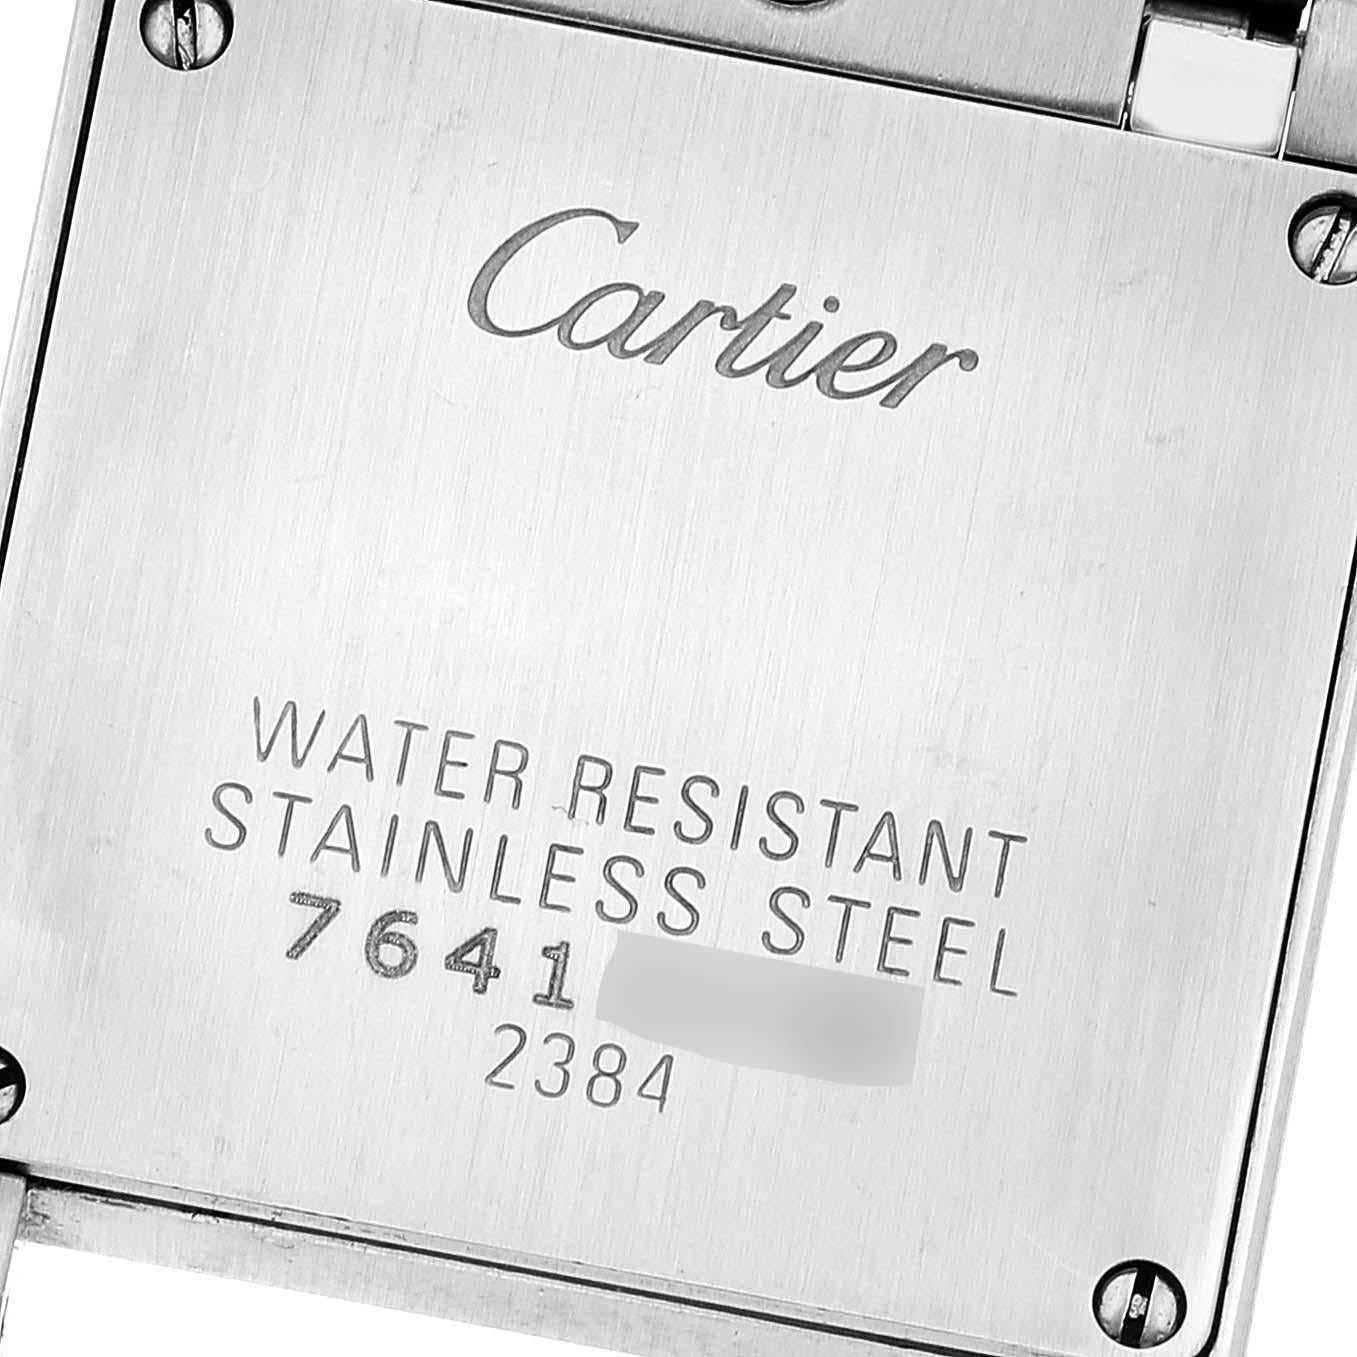 Cartier Tank Francaise Small Steel Yellow Gold Ladies Watch W51007Q4. Quartz movement. Rectangular stainless steel 25.0 x 20.0 mm case. Octagonal 18k yellow gold crown set with a blue spinel cabochon. . Scratch resistant sapphire crystal. Silvered